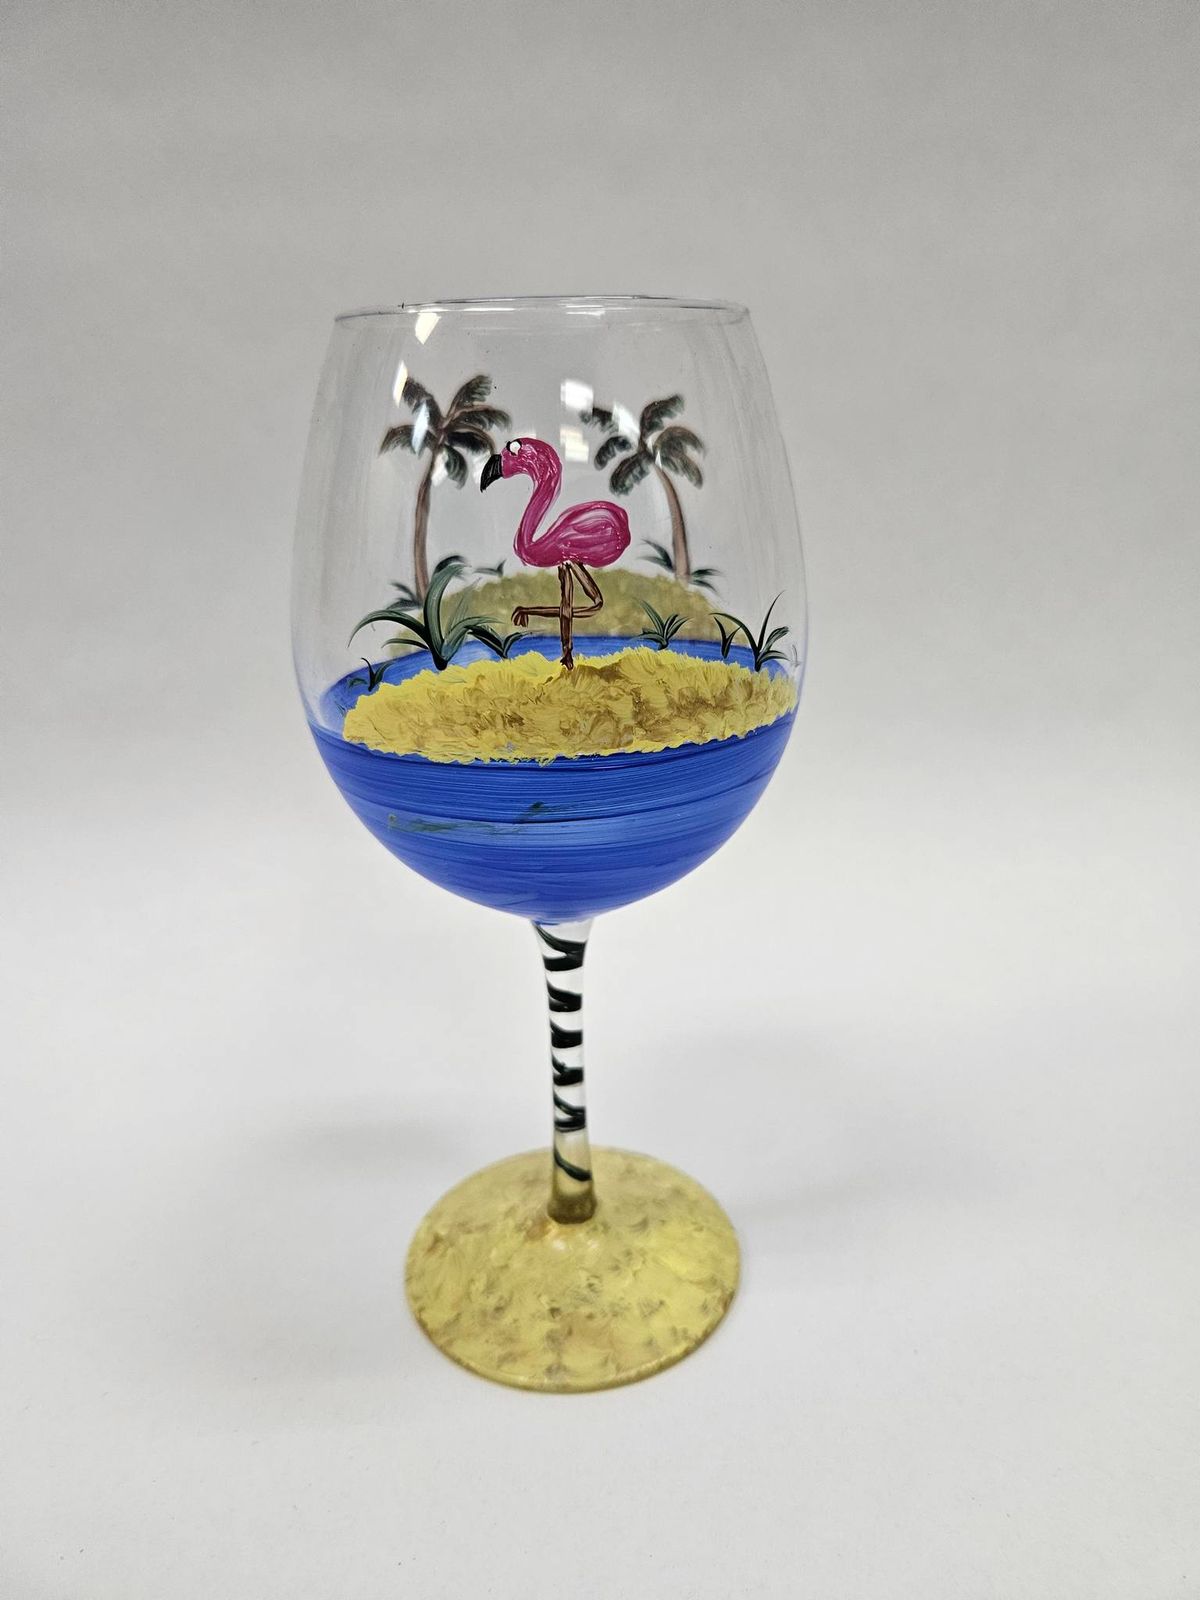 Wine Down Wednesday Includes 1 Drink! Wine Glasses - Flamingo - Paint & Sip Class